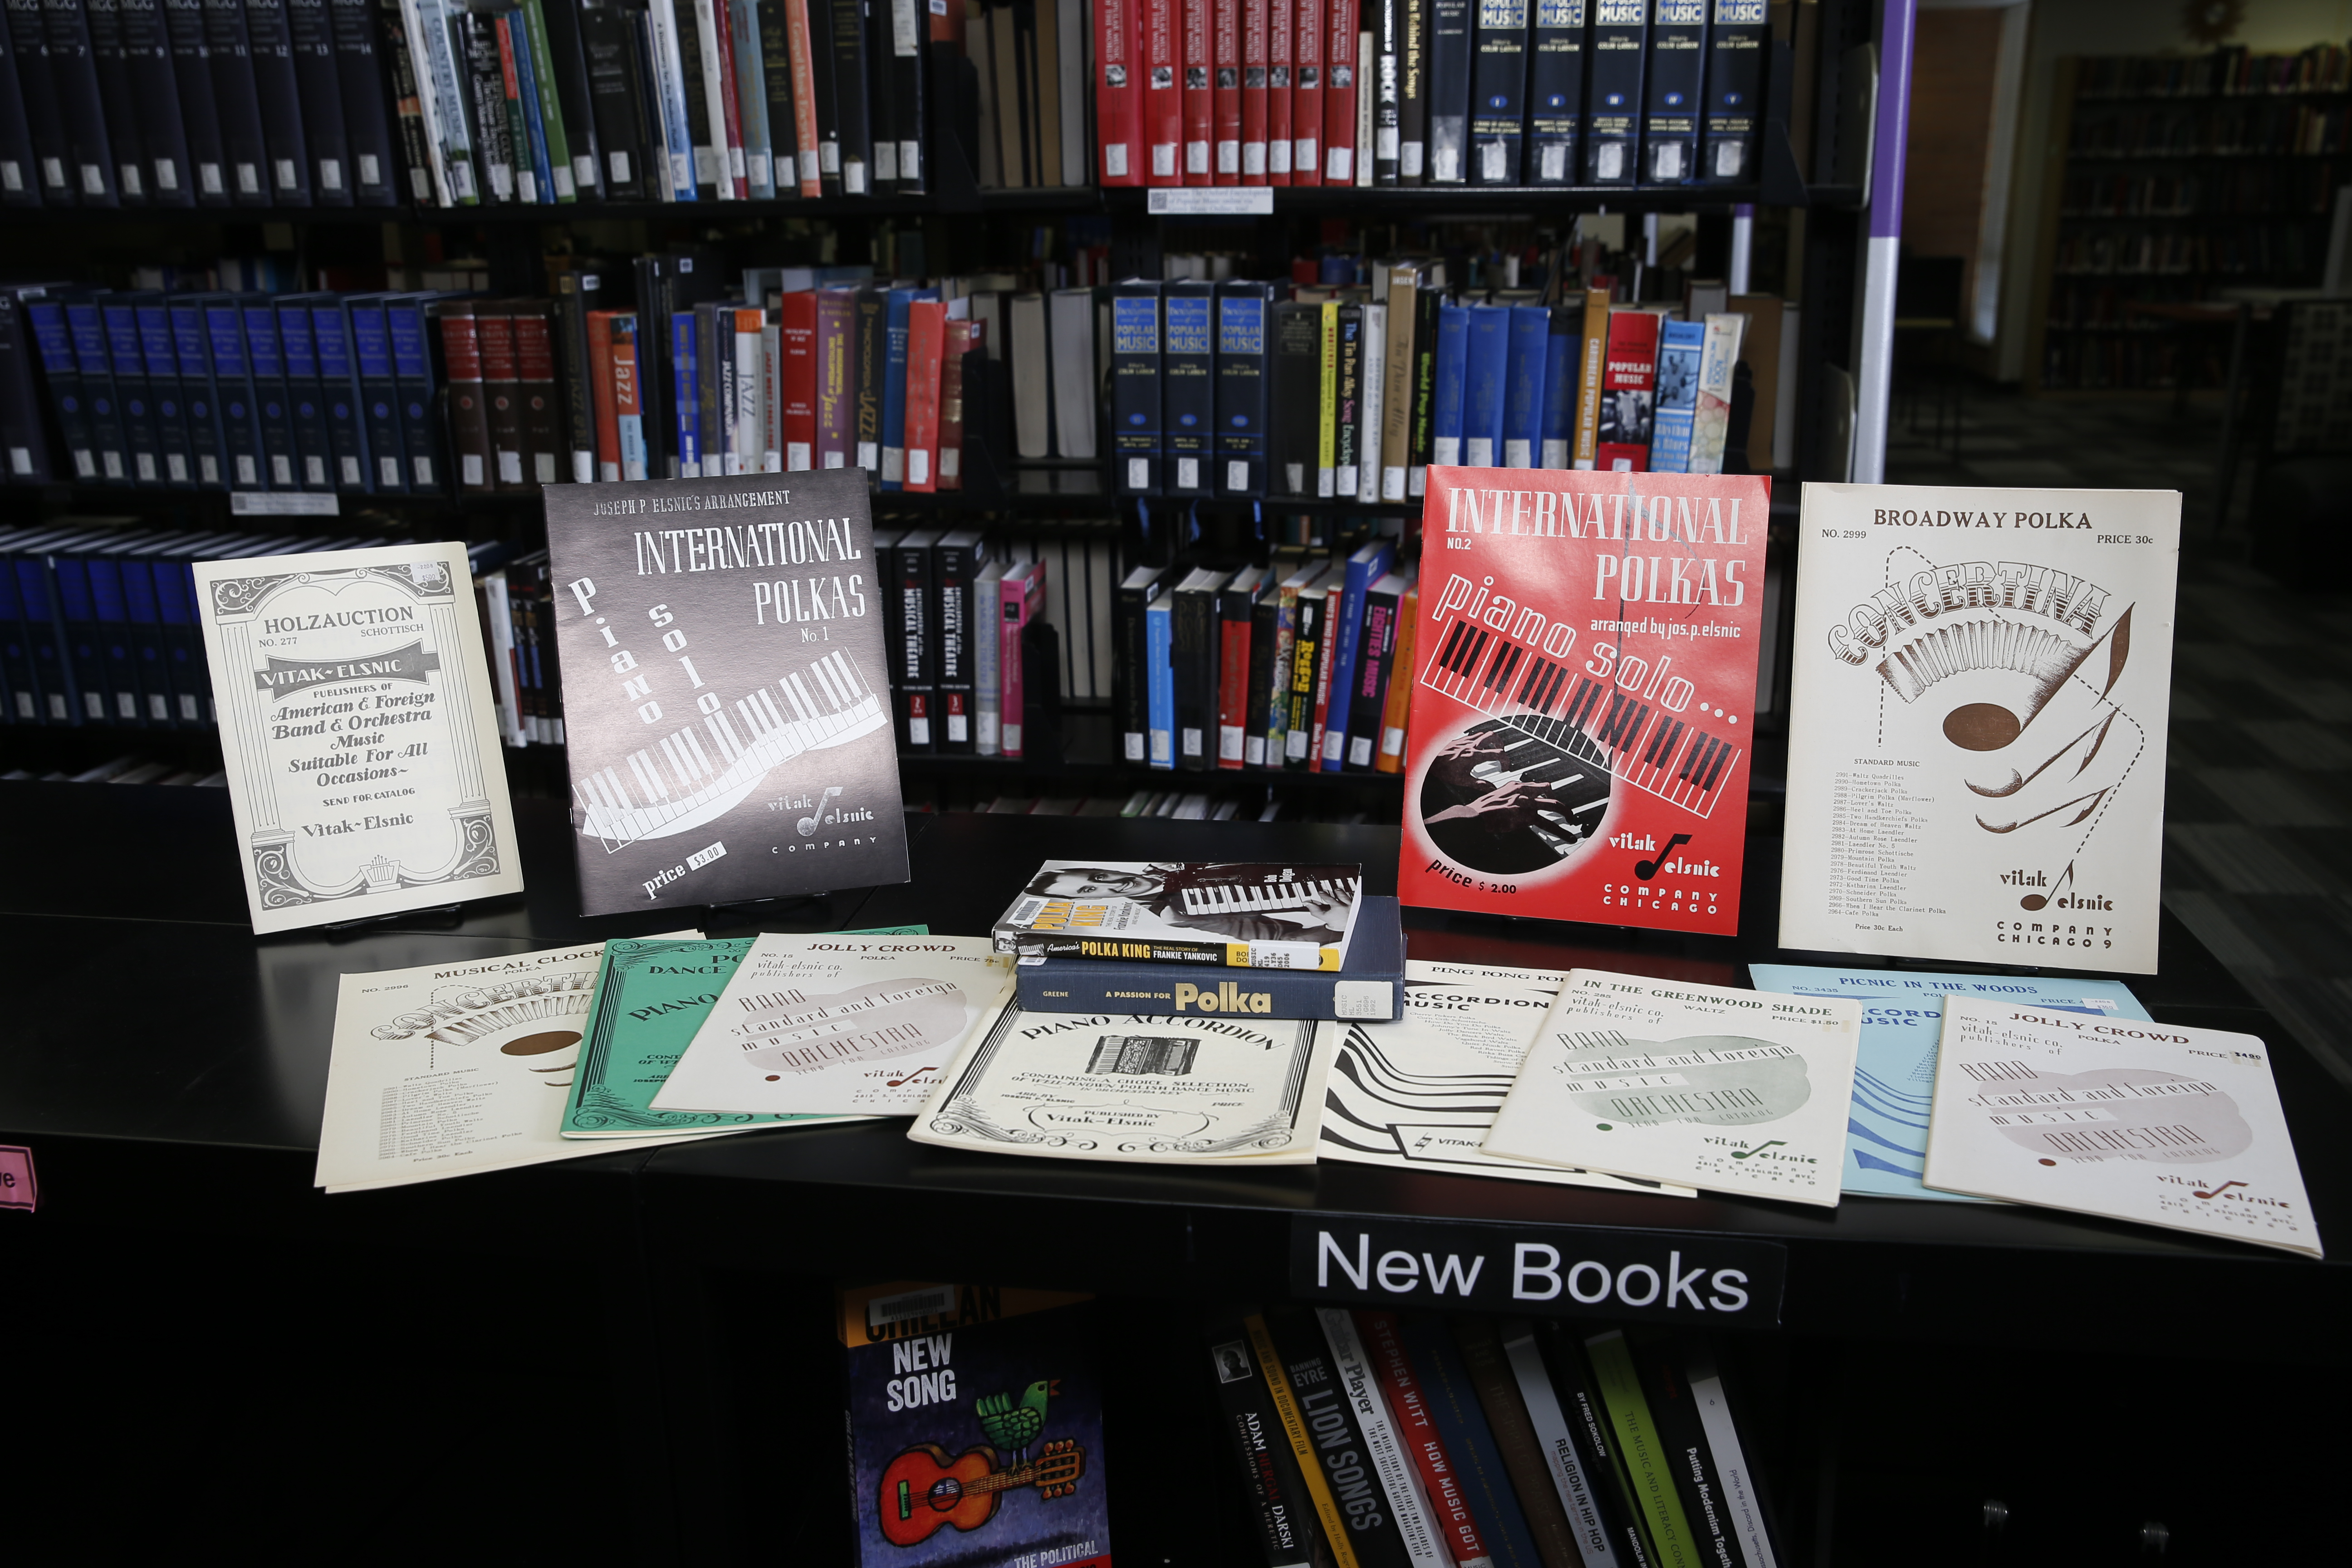 Polka scores and books from the collections of the Music Library and Bill Schurk Sound Archives